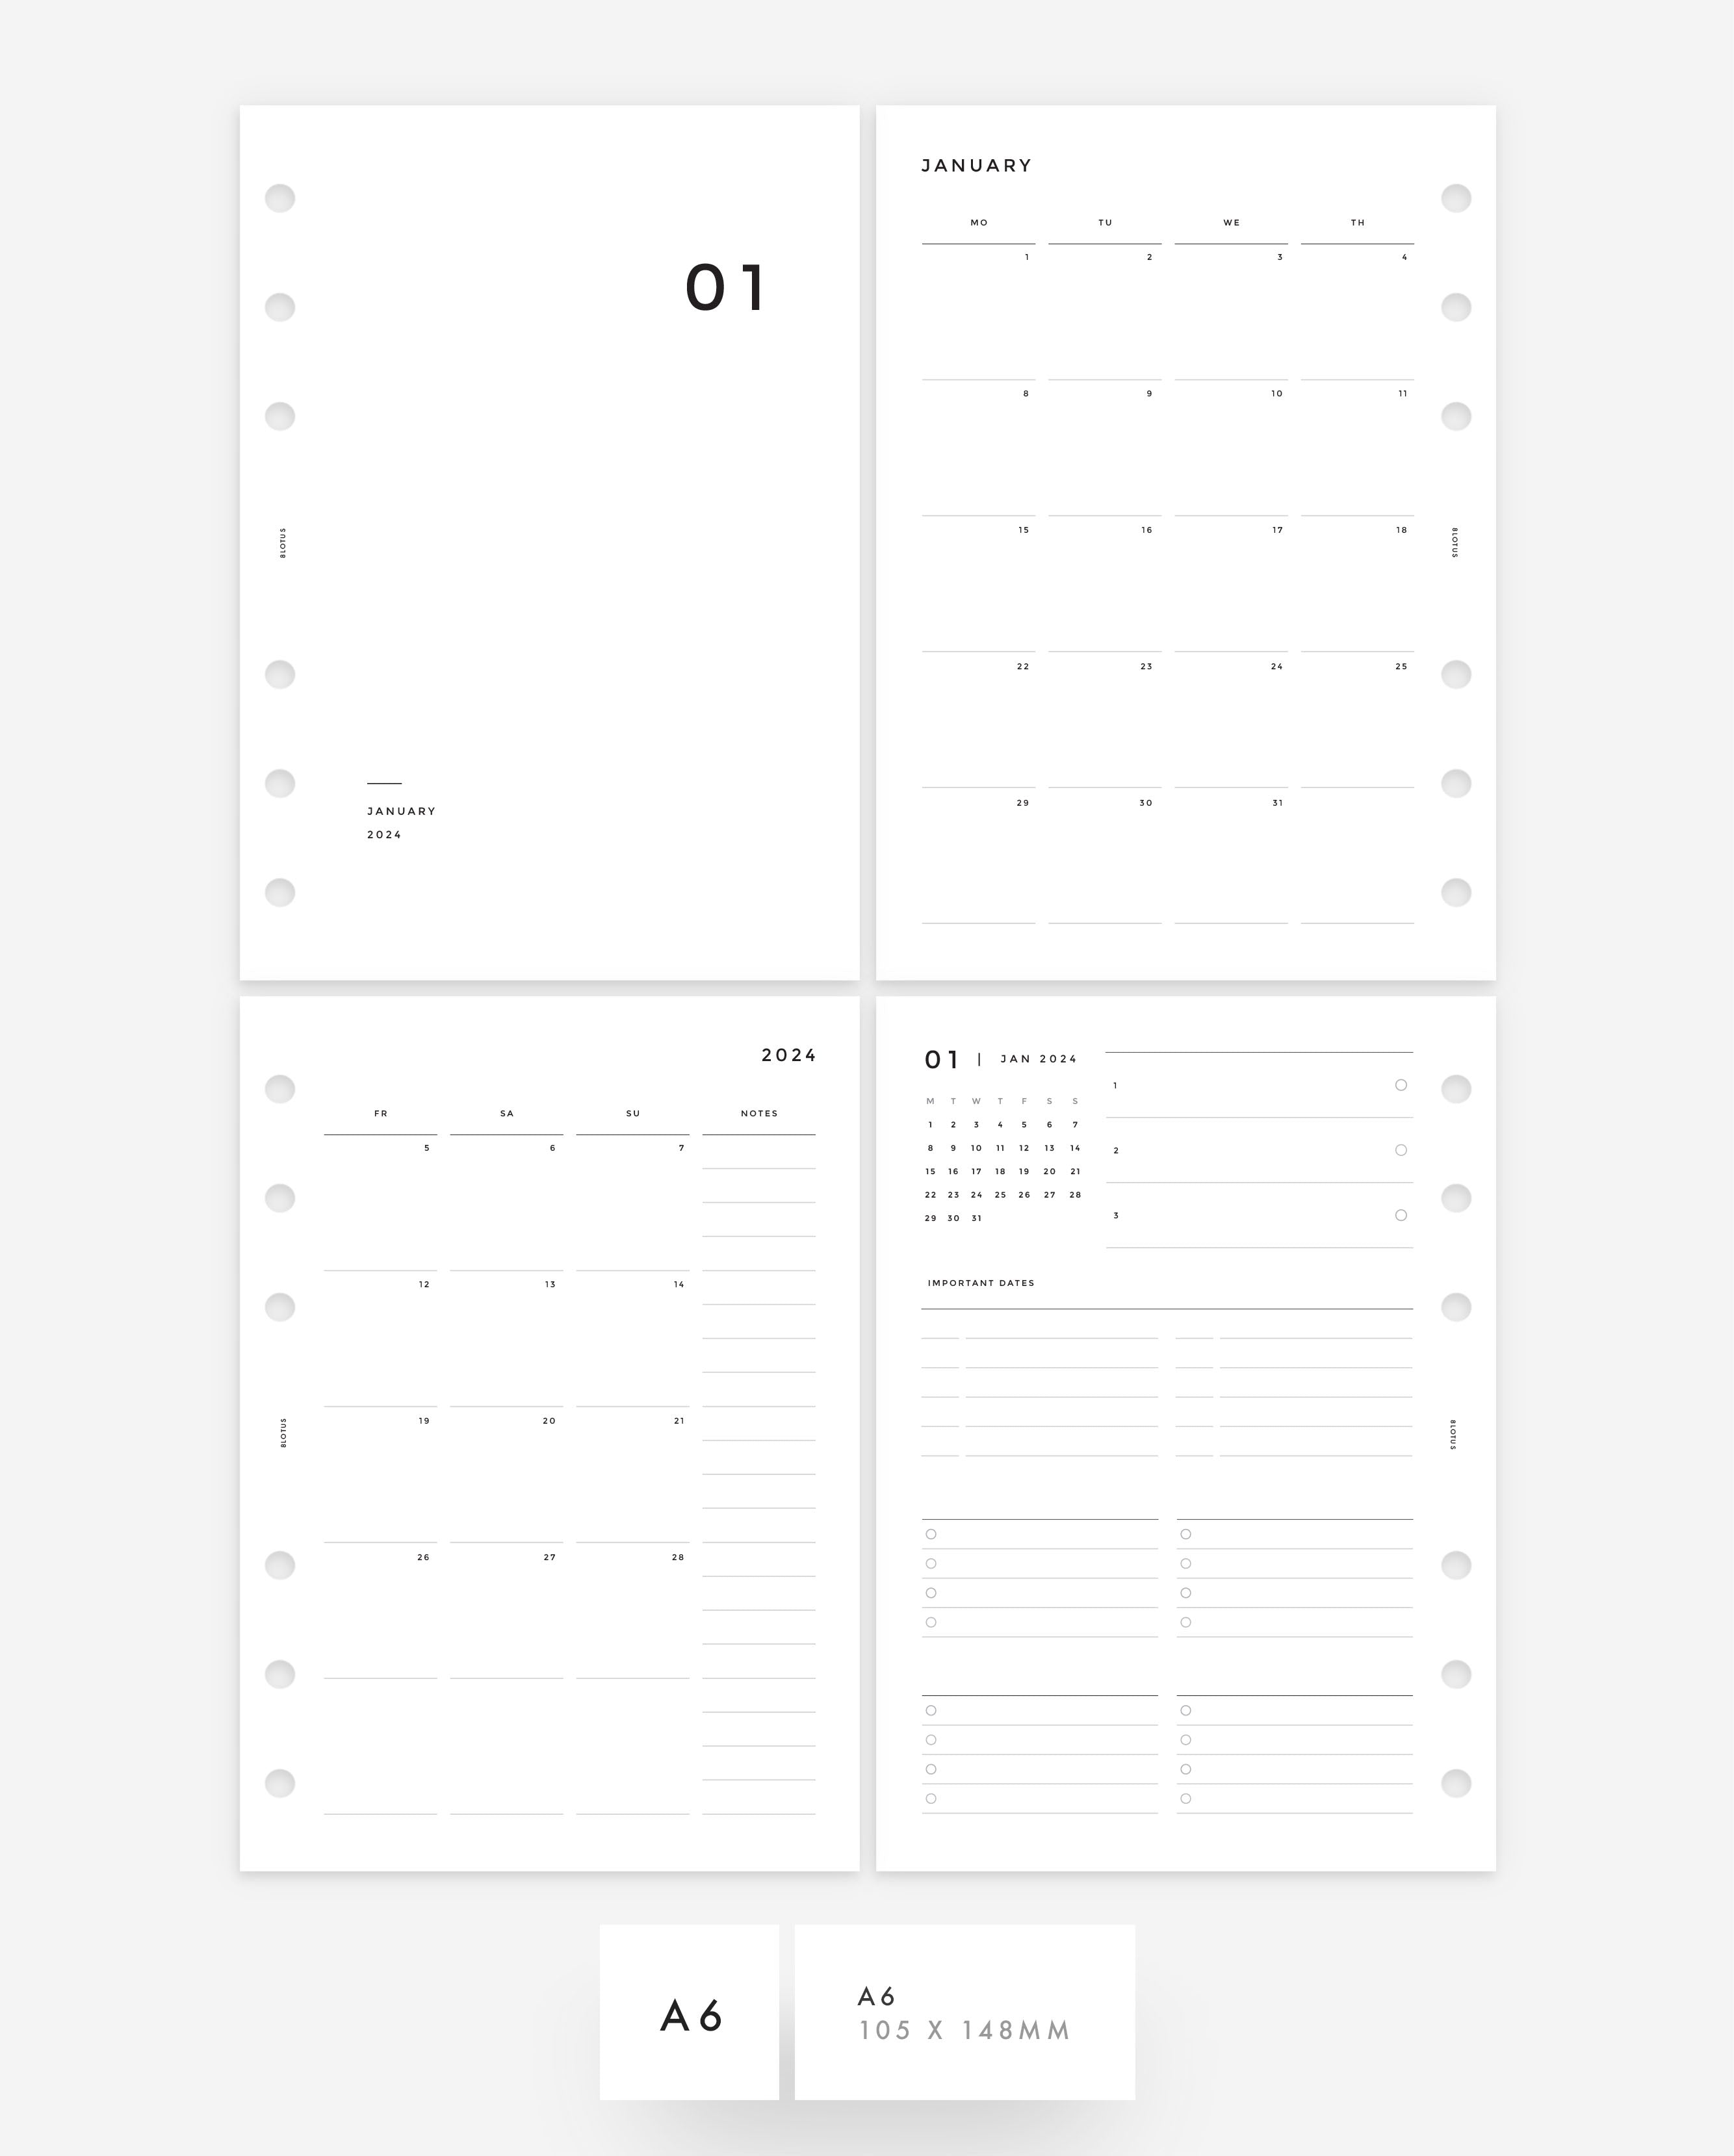 Beautiful Calendar Inserts for Any Agenda, Especially for the